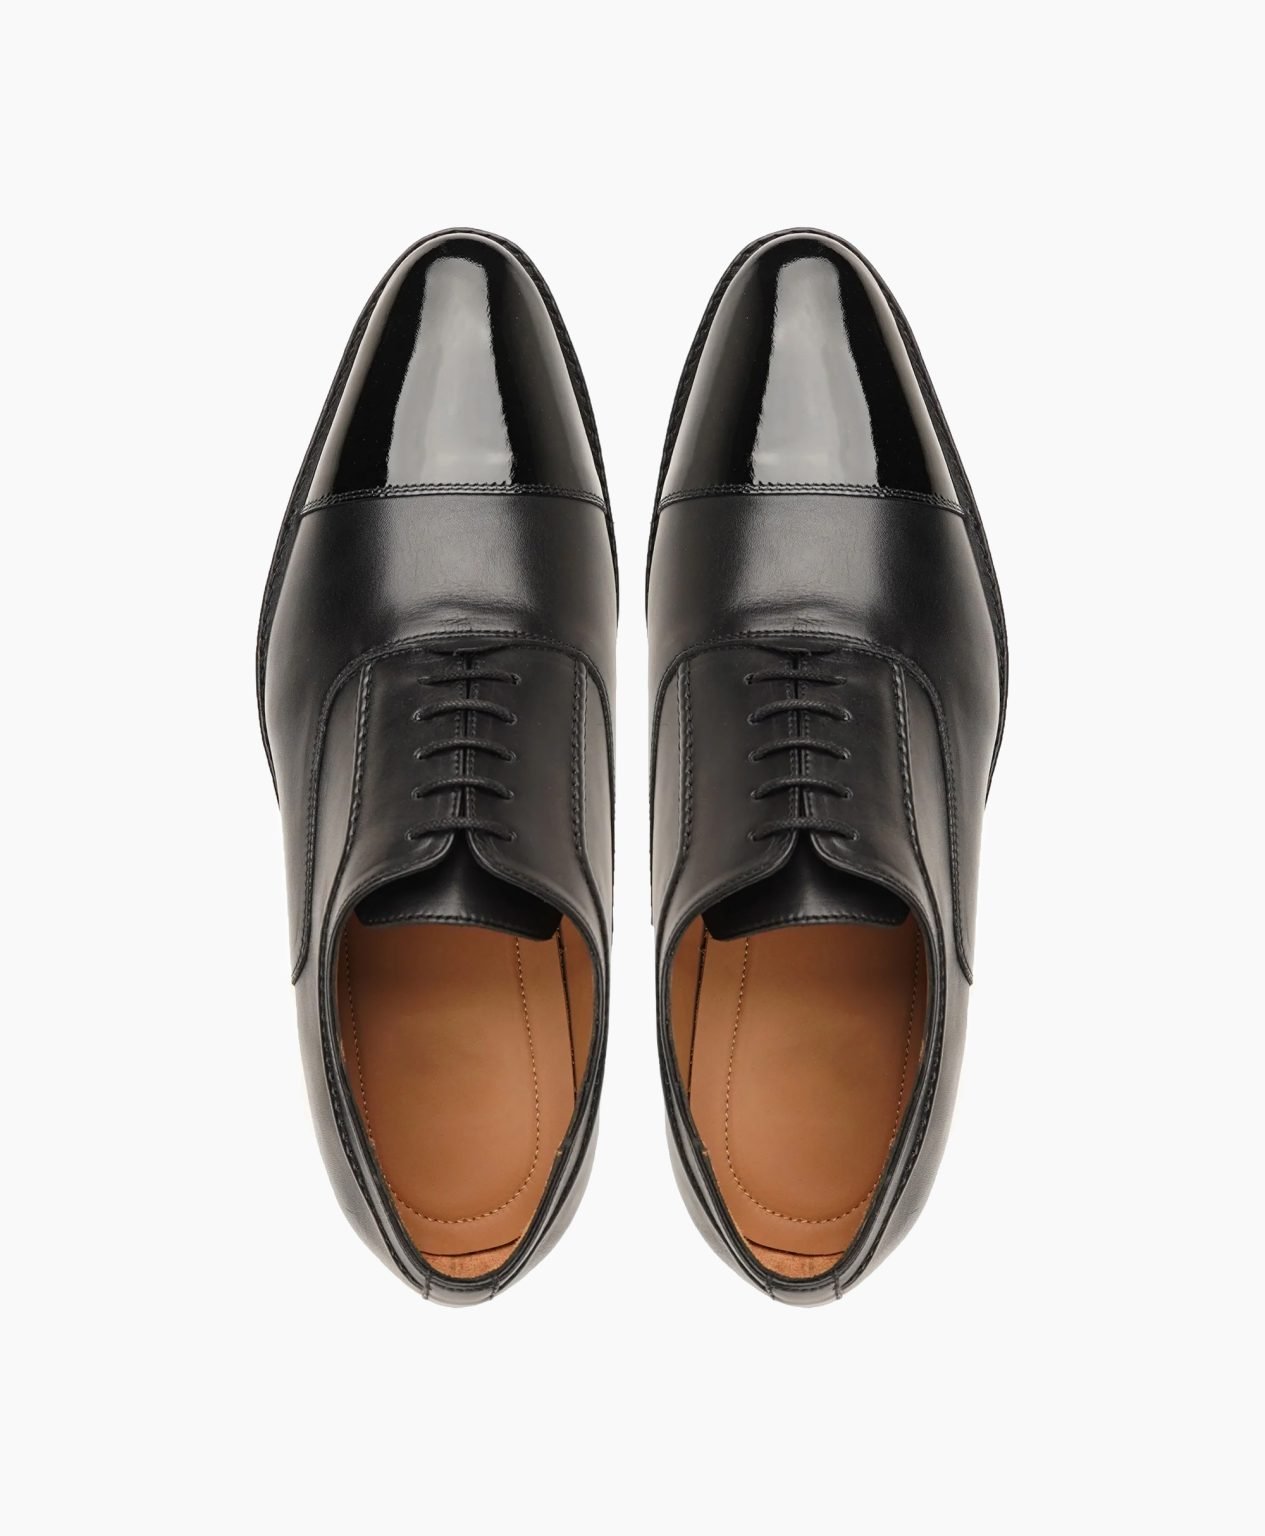 looe-oxford-black-with-patent-toe-cap-leather-shoes-image202